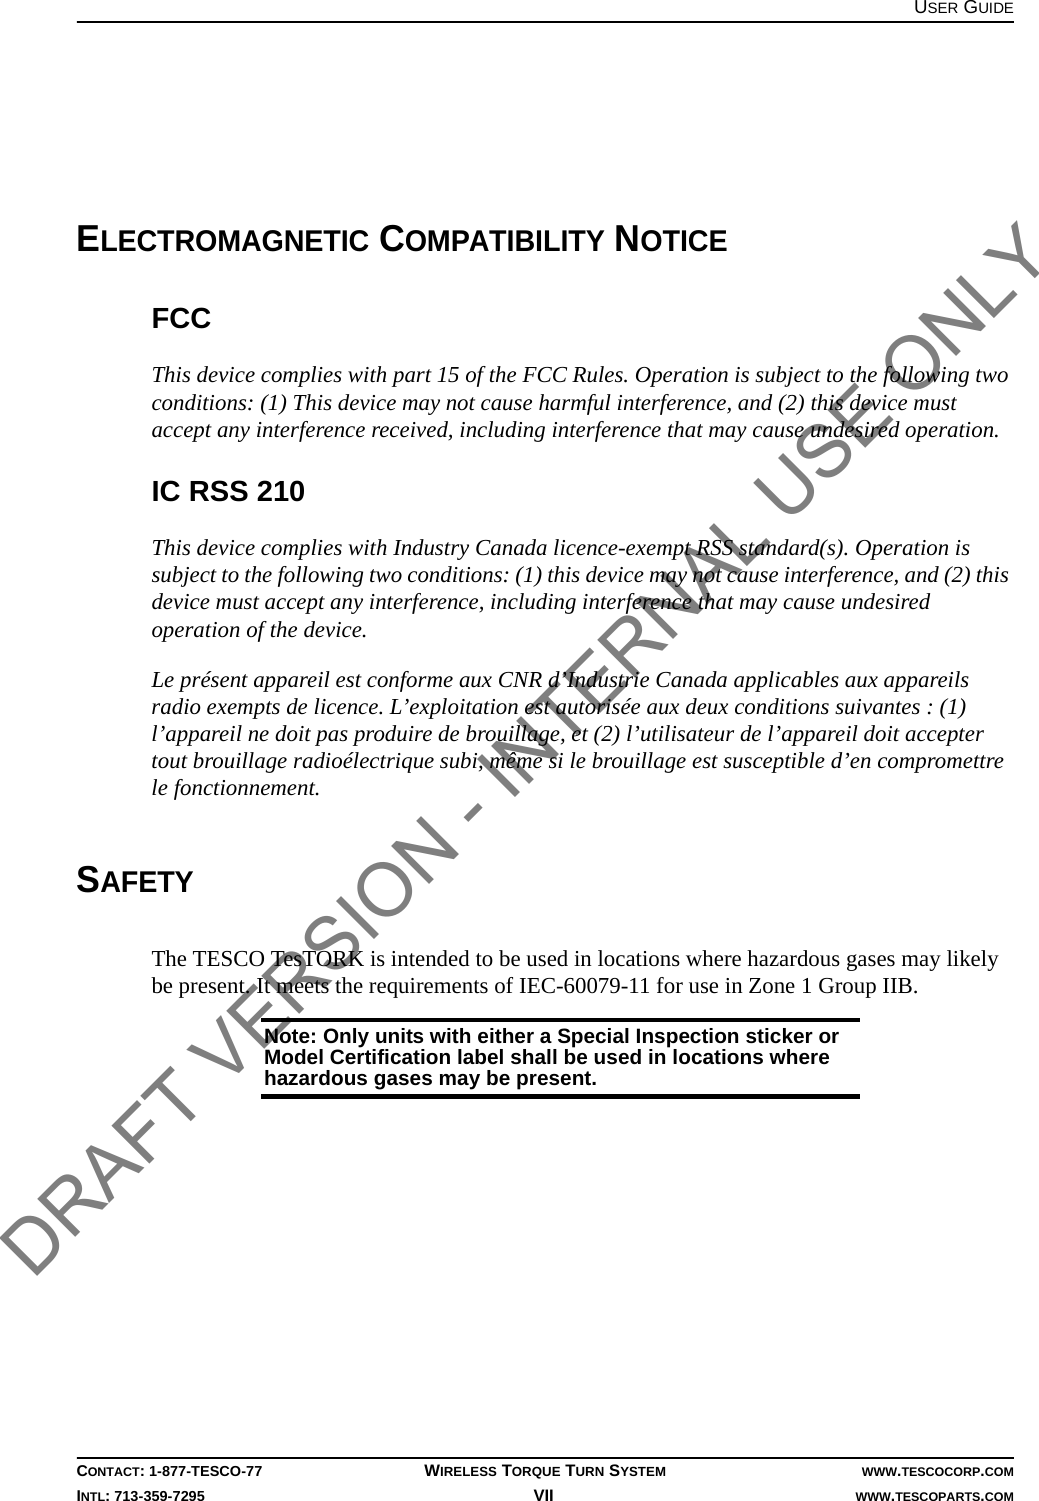 USER GUIDECONTACT: 1-877-TESCO-77 WIRELESS TORQUE TURN SYSTEM WWW.TESCOCORP.COMINTL: 713-359-7295 VII    WWW.TESCOPARTS.COMELECTROMAGNETIC COMPATIBILITY NOTICEFCCThis device complies with part 15 of the FCC Rules. Operation is subject to the following two conditions: (1) This device may not cause harmful interference, and (2) this device must accept any interference received, including interference that may cause undesired operation.IC RSS 210This device complies with Industry Canada licence-exempt RSS standard(s). Operation is subject to the following two conditions: (1) this device may not cause interference, and (2) this device must accept any interference, including interference that may cause undesired operation of the device.Le présent appareil est conforme aux CNR d’Industrie Canada applicables aux appareils radio exempts de licence. L’exploitation est autorisée aux deux conditions suivantes : (1) l’appareil ne doit pas produire de brouillage, et (2) l’utilisateur de l’appareil doit accepter tout brouillage radioélectrique subi, même si le brouillage est susceptible d’en compromettre le fonctionnement.SAFETYThe TESCO TesTORK is intended to be used in locations where hazardous gases may likely be present. It meets the requirements of IEC-60079-11 for use in Zone 1 Group IIB.Note: Only units with either a Special Inspection sticker or Model Certification label shall be used in locations where hazardous gases may be present. DRAFT VERSION - INTERNAL USE ONLY